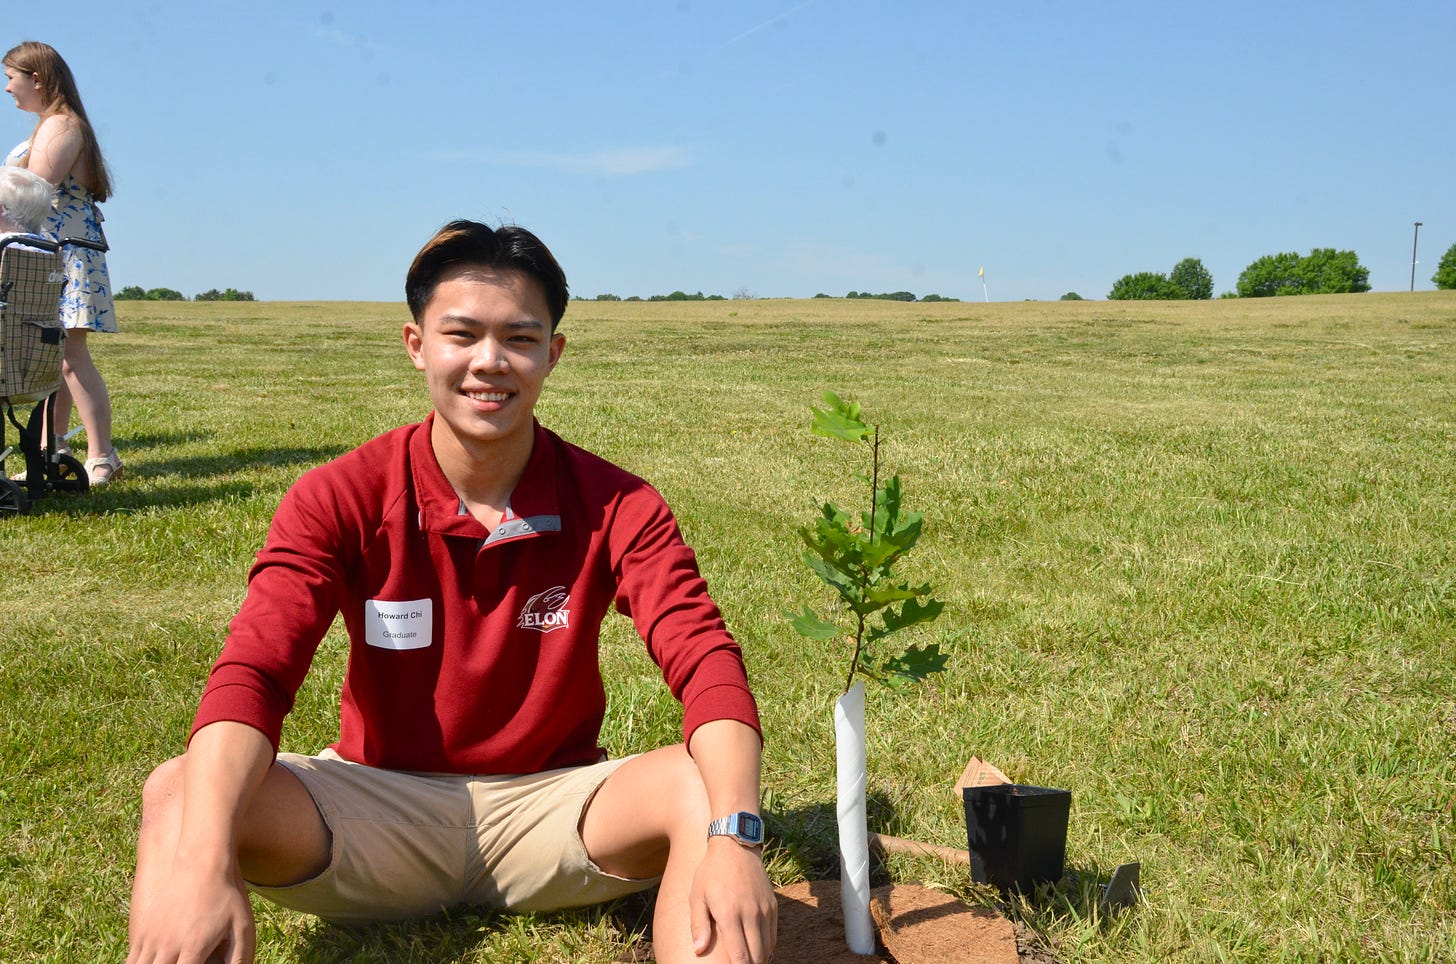 International Students Leave Their Marks On Elon At Tree Planting Ceremony